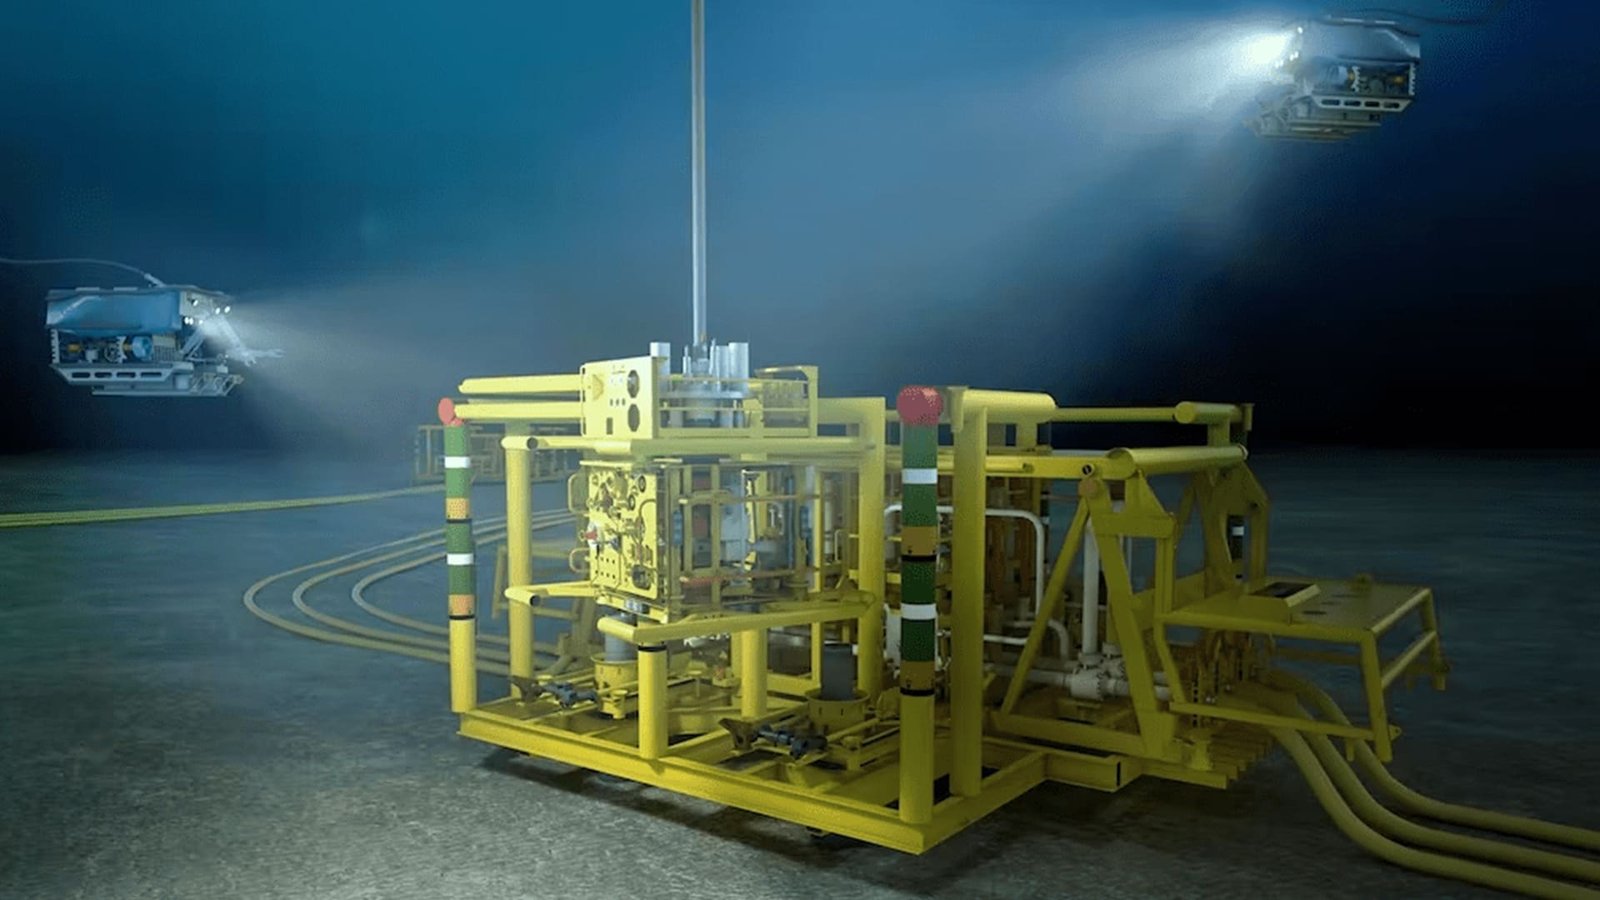 
				<header class="entry-header">
					<h2 class="entry-title">
						<a title="Subsea Facilities" href="https://unircable.com/recent-project/" target="_blank">Subsea Facilities</a>
					</h2>
				</header>